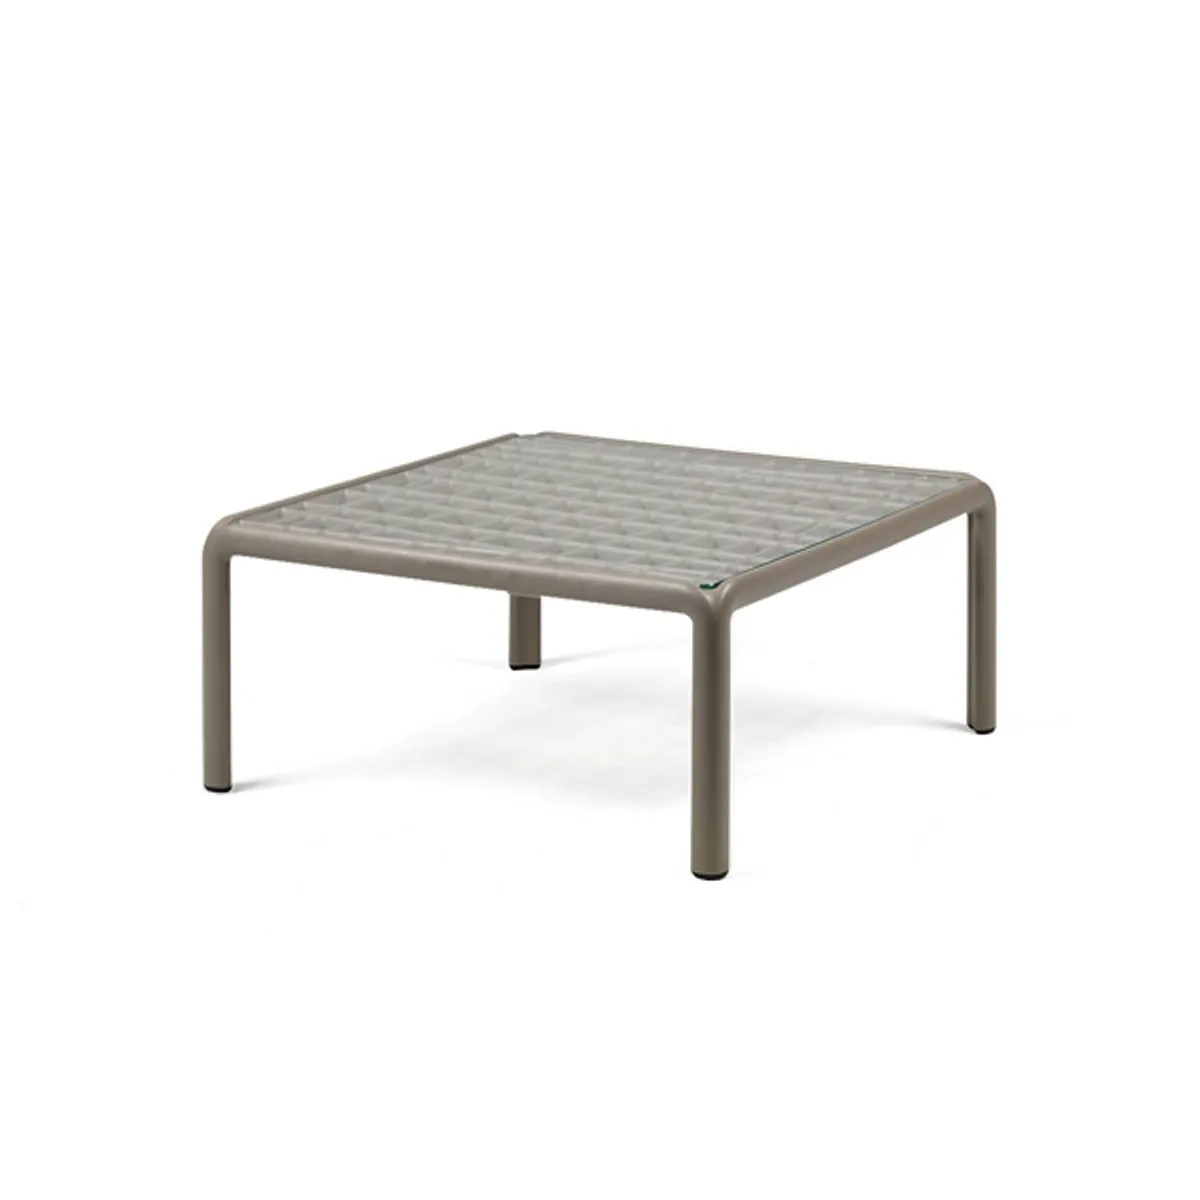 Komodo glass coffee table Inside Out Contracts4